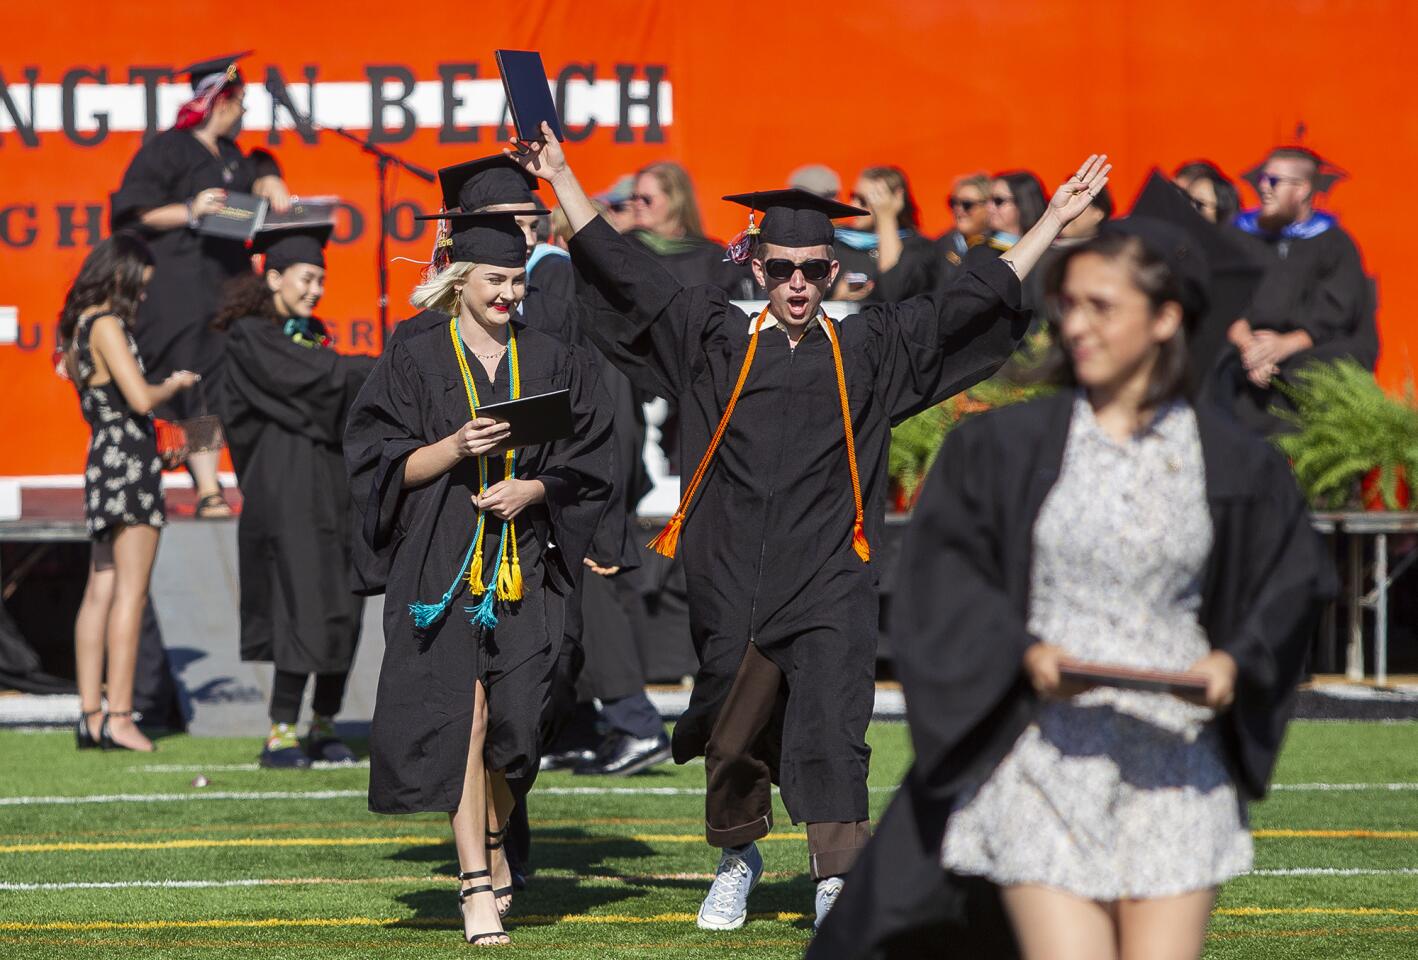 Lola Trifunovic, left, and Damian Kassoff celebrate during the commencement ceremony for the Huntington Beach High School class of 2018 on Wednesday, June 13.